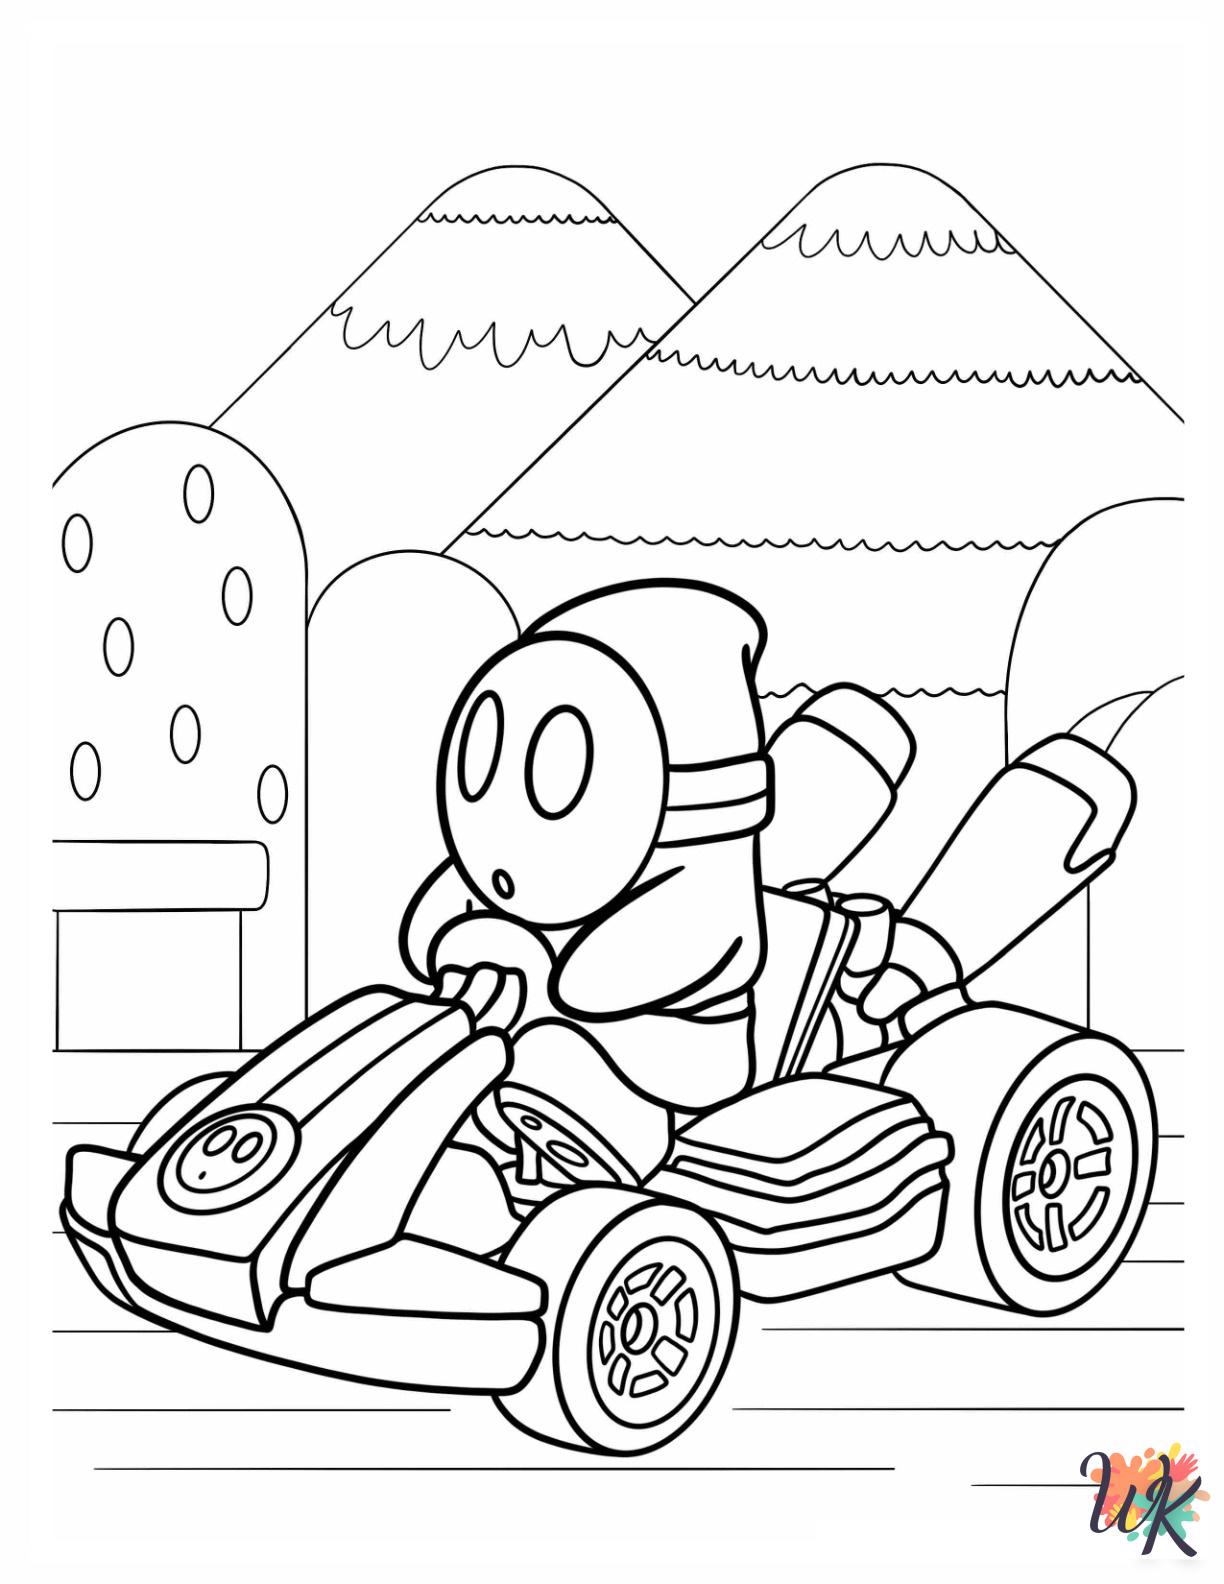 Shy Guy coloring pages free printable 1